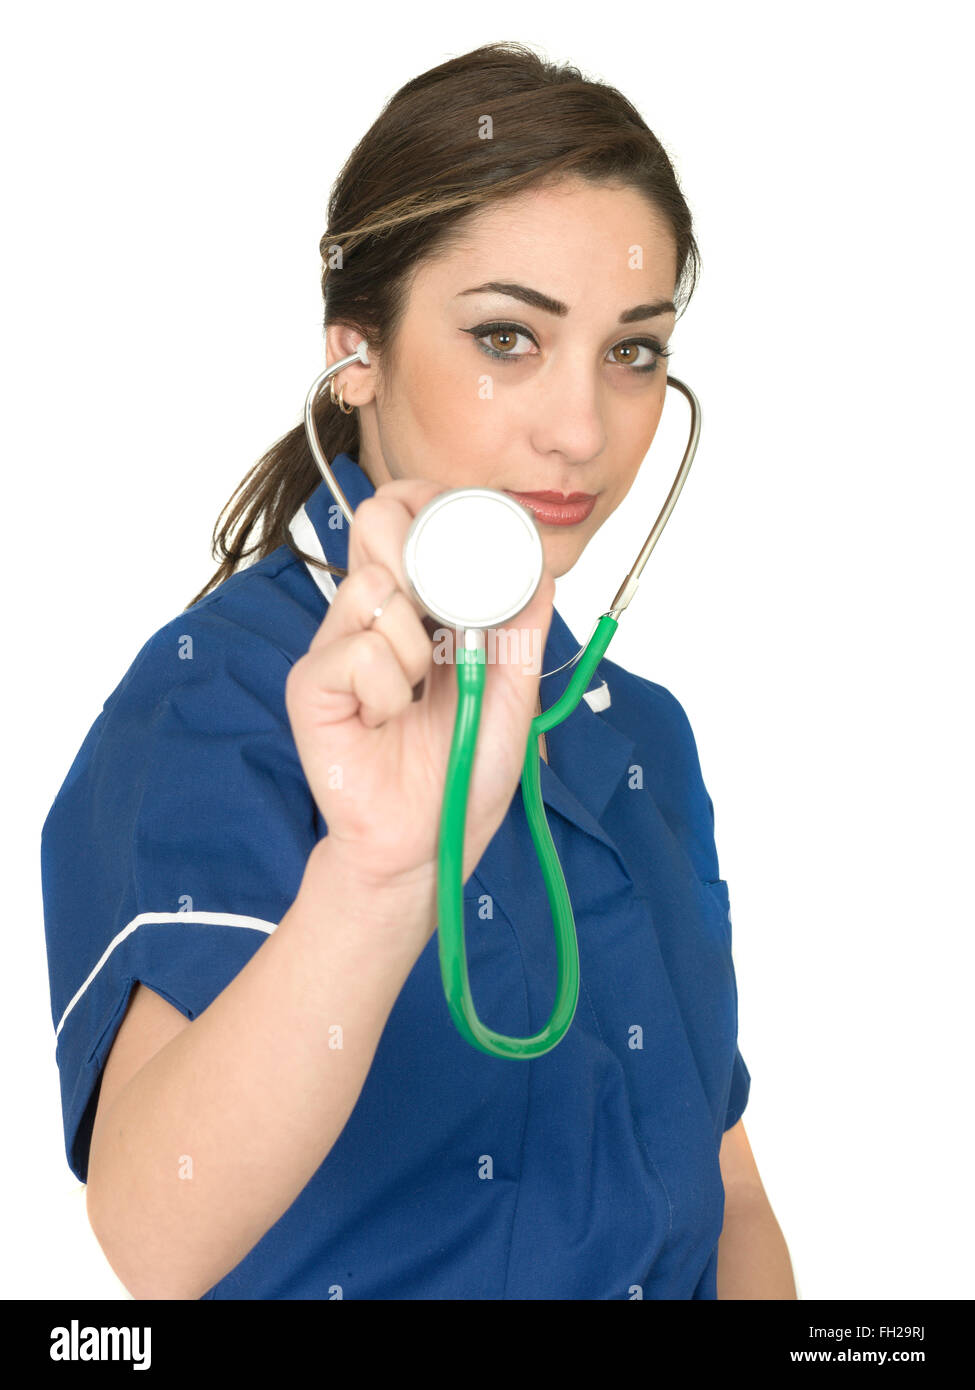 Young Female Doctor Or Physician Dealing With The Coronavirus Or Covid-19 Pandemic, Alone In Uniform, Isolated On White Stock Photo